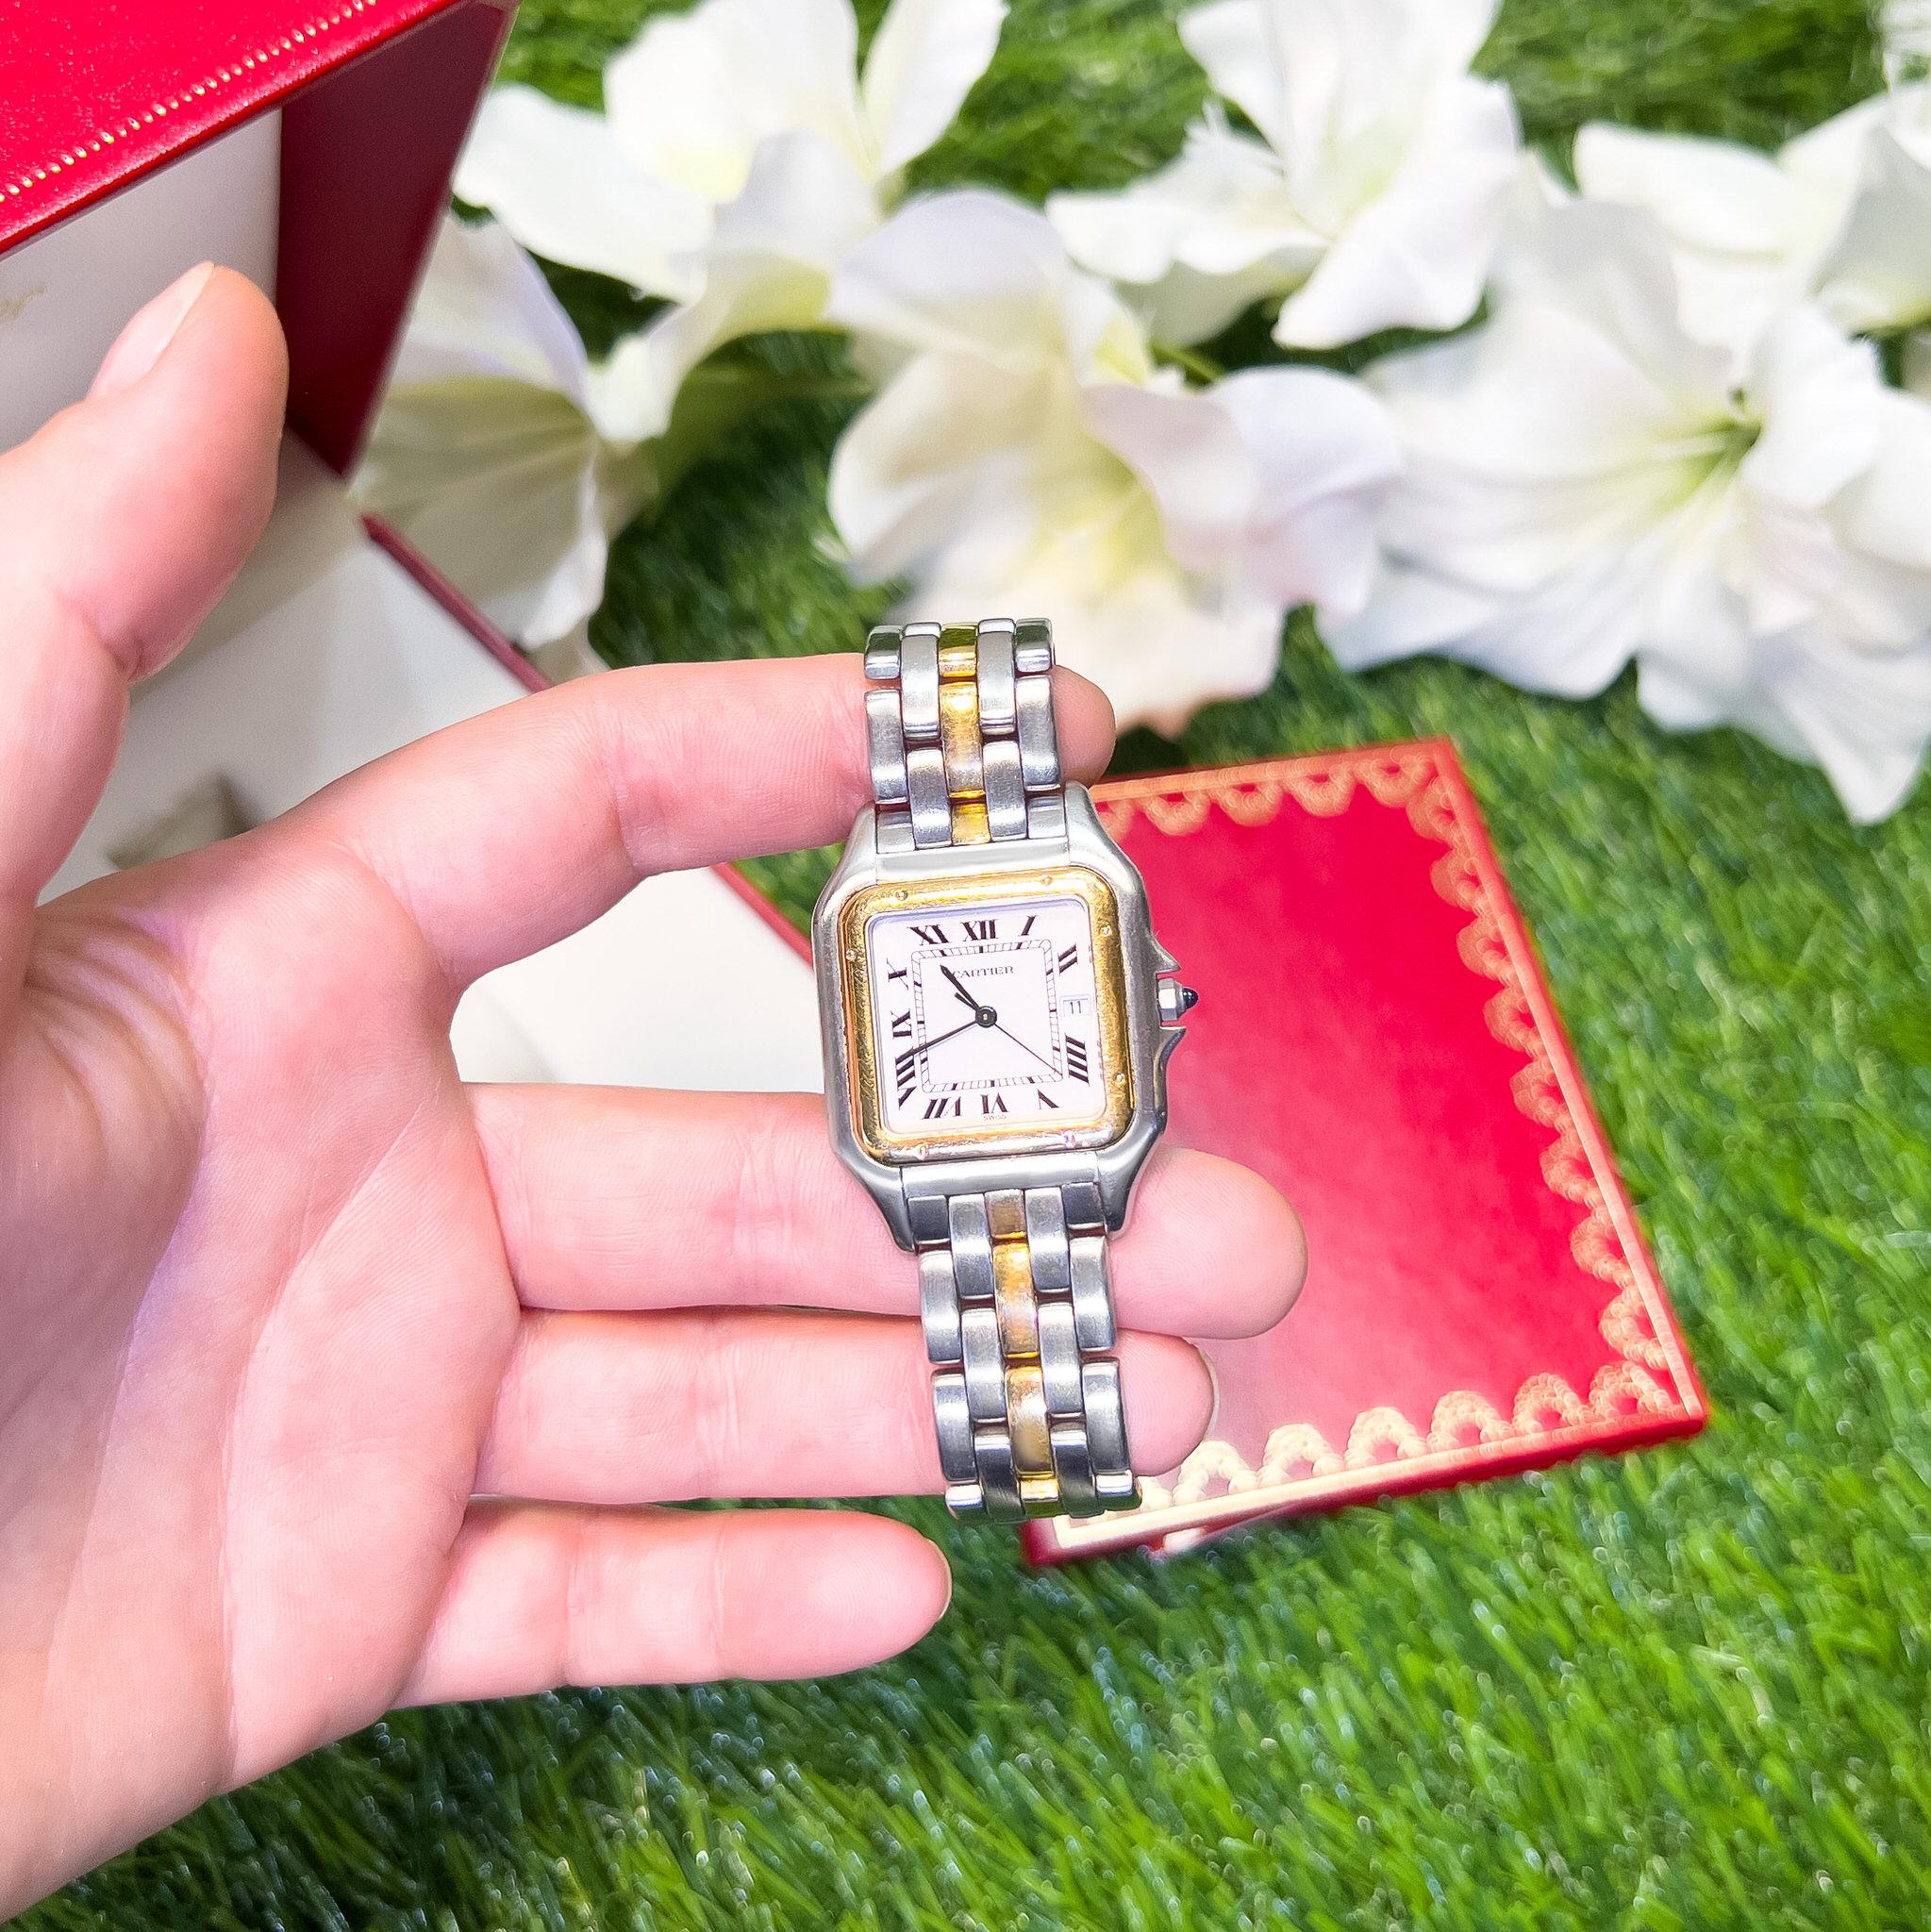 It comes with the Authenticity Certificate by GIA GG/AJP, Original Papers, Cartier Travel Pouch
Brand: Cartier
Model: Panthere de Cartier
Reference Number: 5435
Movement: Quartz
Functions: Date, Time
Case Material: Gold, Steel
Case Size: 29 x 40